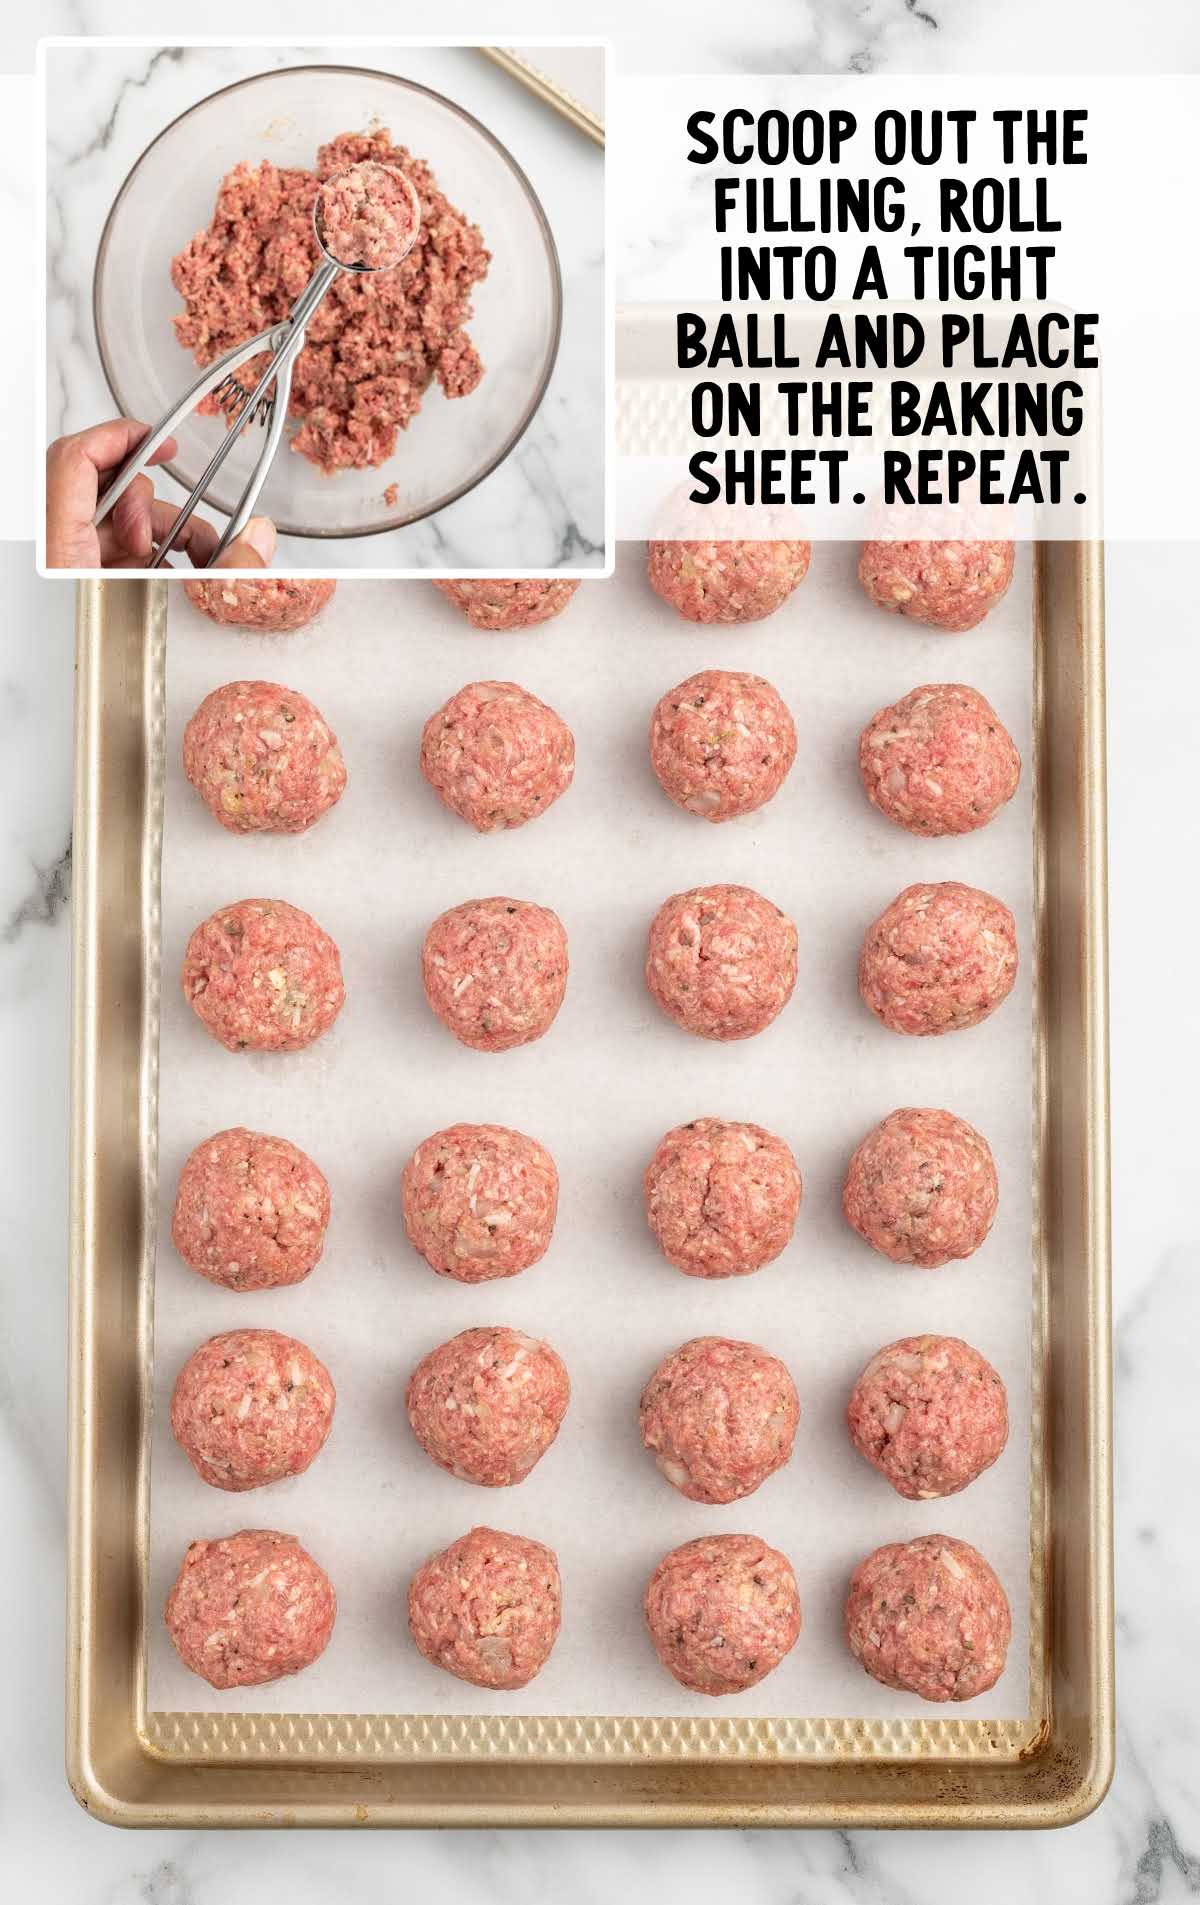 meatball mixture scooped out and placed on a baking sheet